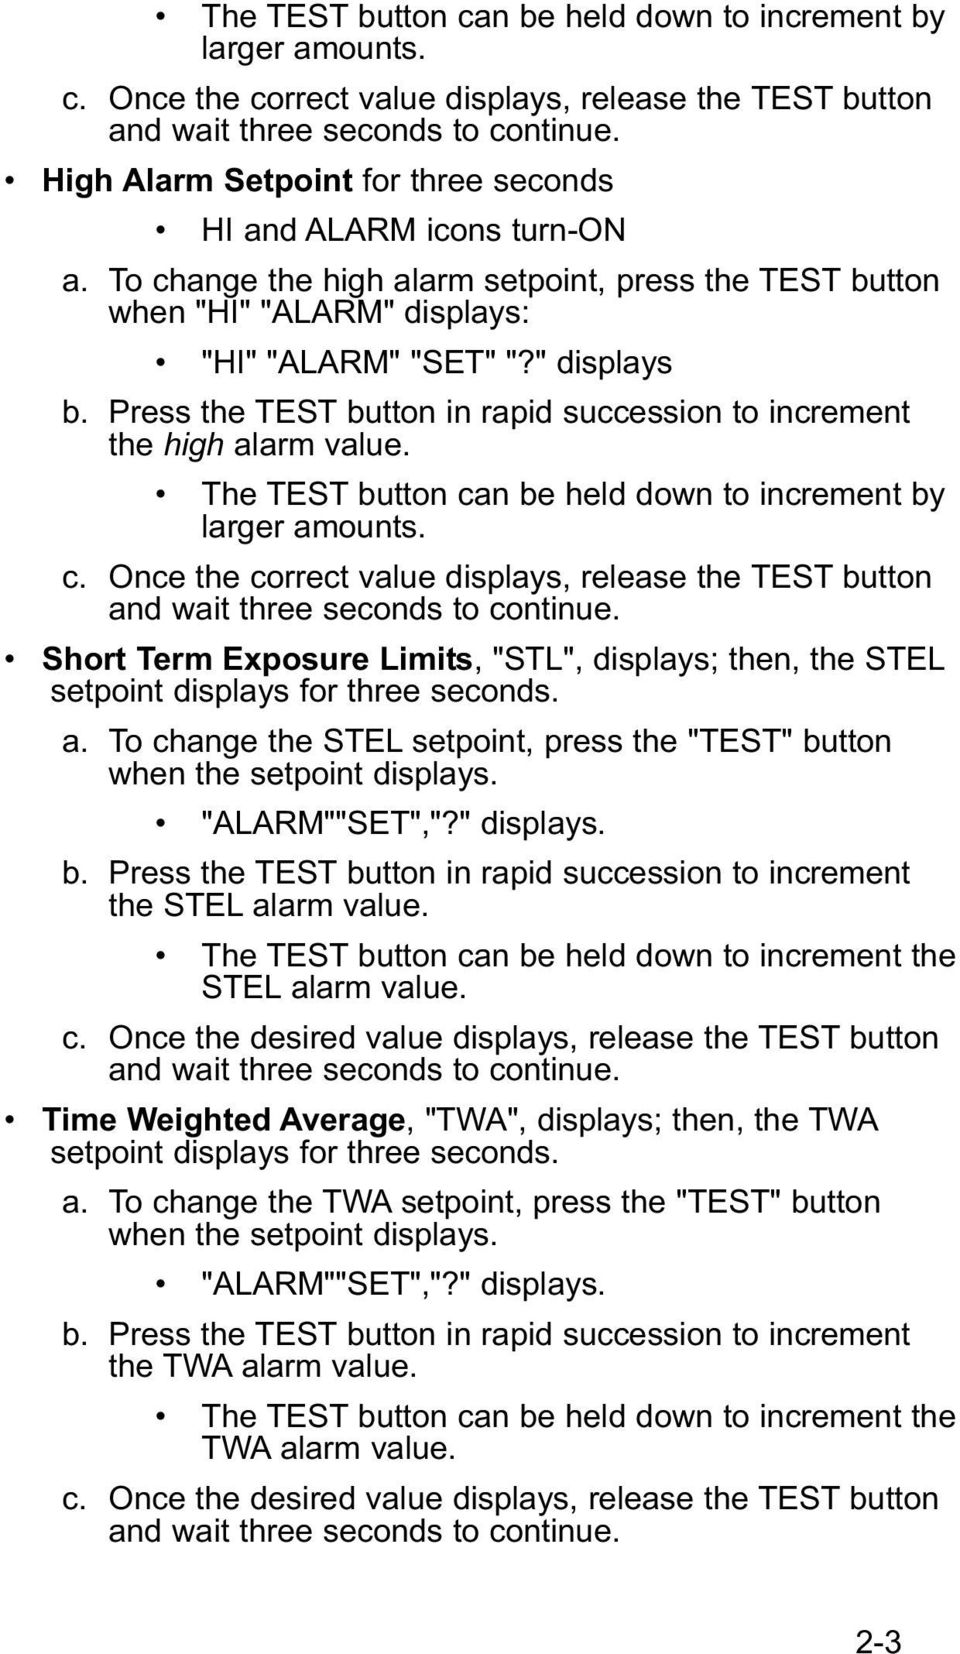 Press the TEST button in rapid succession to increment the high alarm value.  Short Term Exposure Limits, "STL", displays; then, the STEL setpoint displays for three seconds. a. To change the STEL setpoint, press the "TEST" button when the setpoint displays.